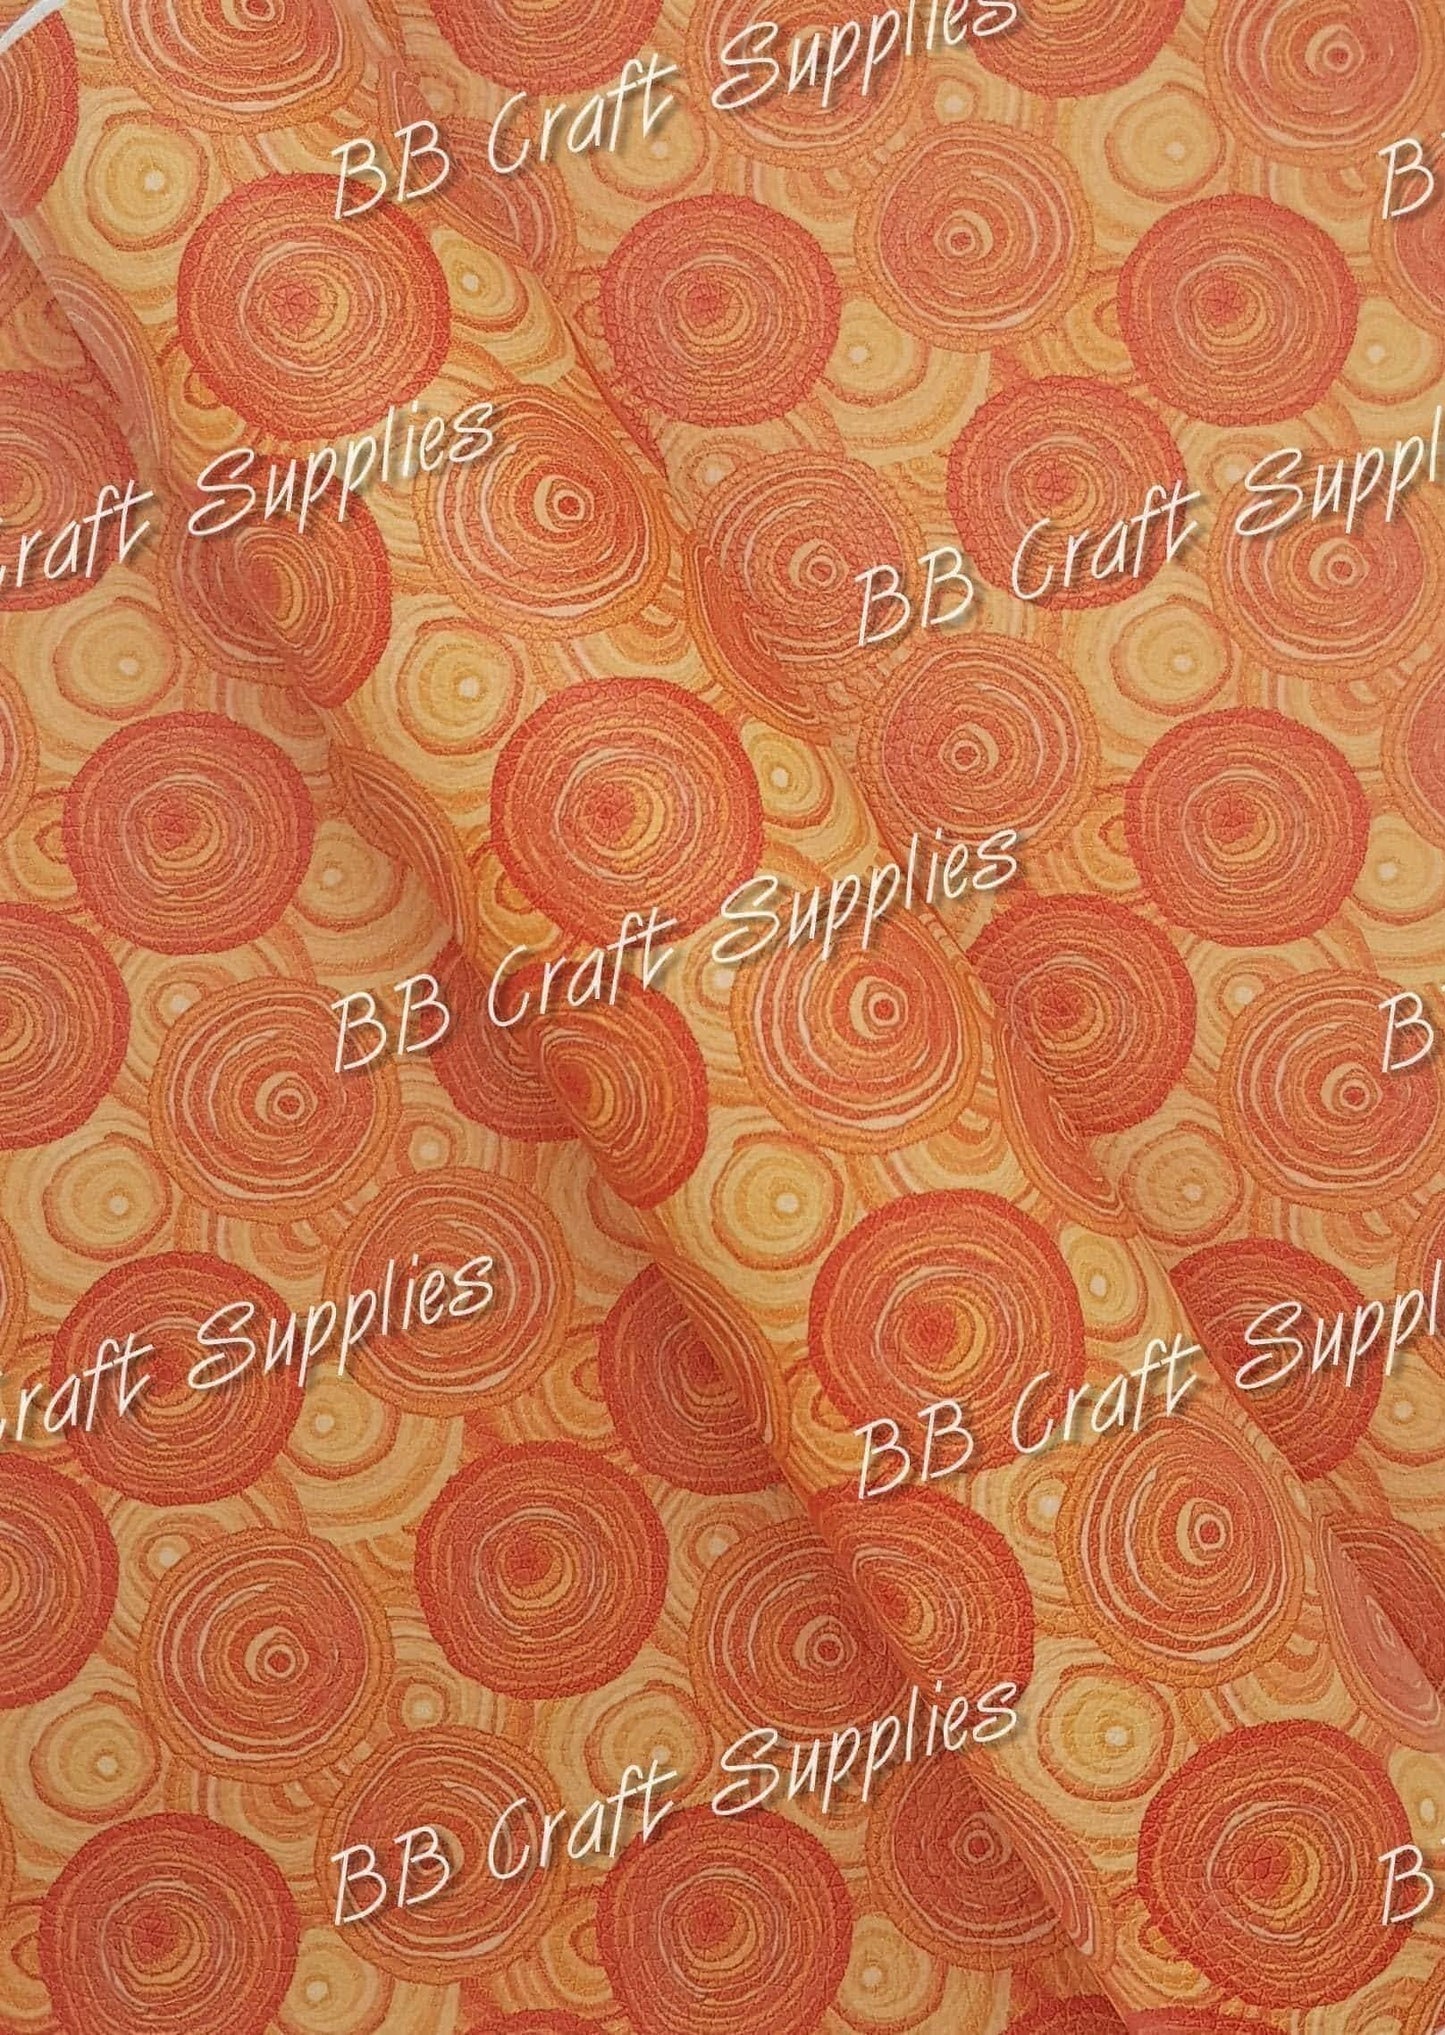 Circle Painting - Art, Australia Day, Australian, circles, Faux, Faux Leather, indigenous, Leather, leatherette - Bare Butler Faux Leather Supplies 